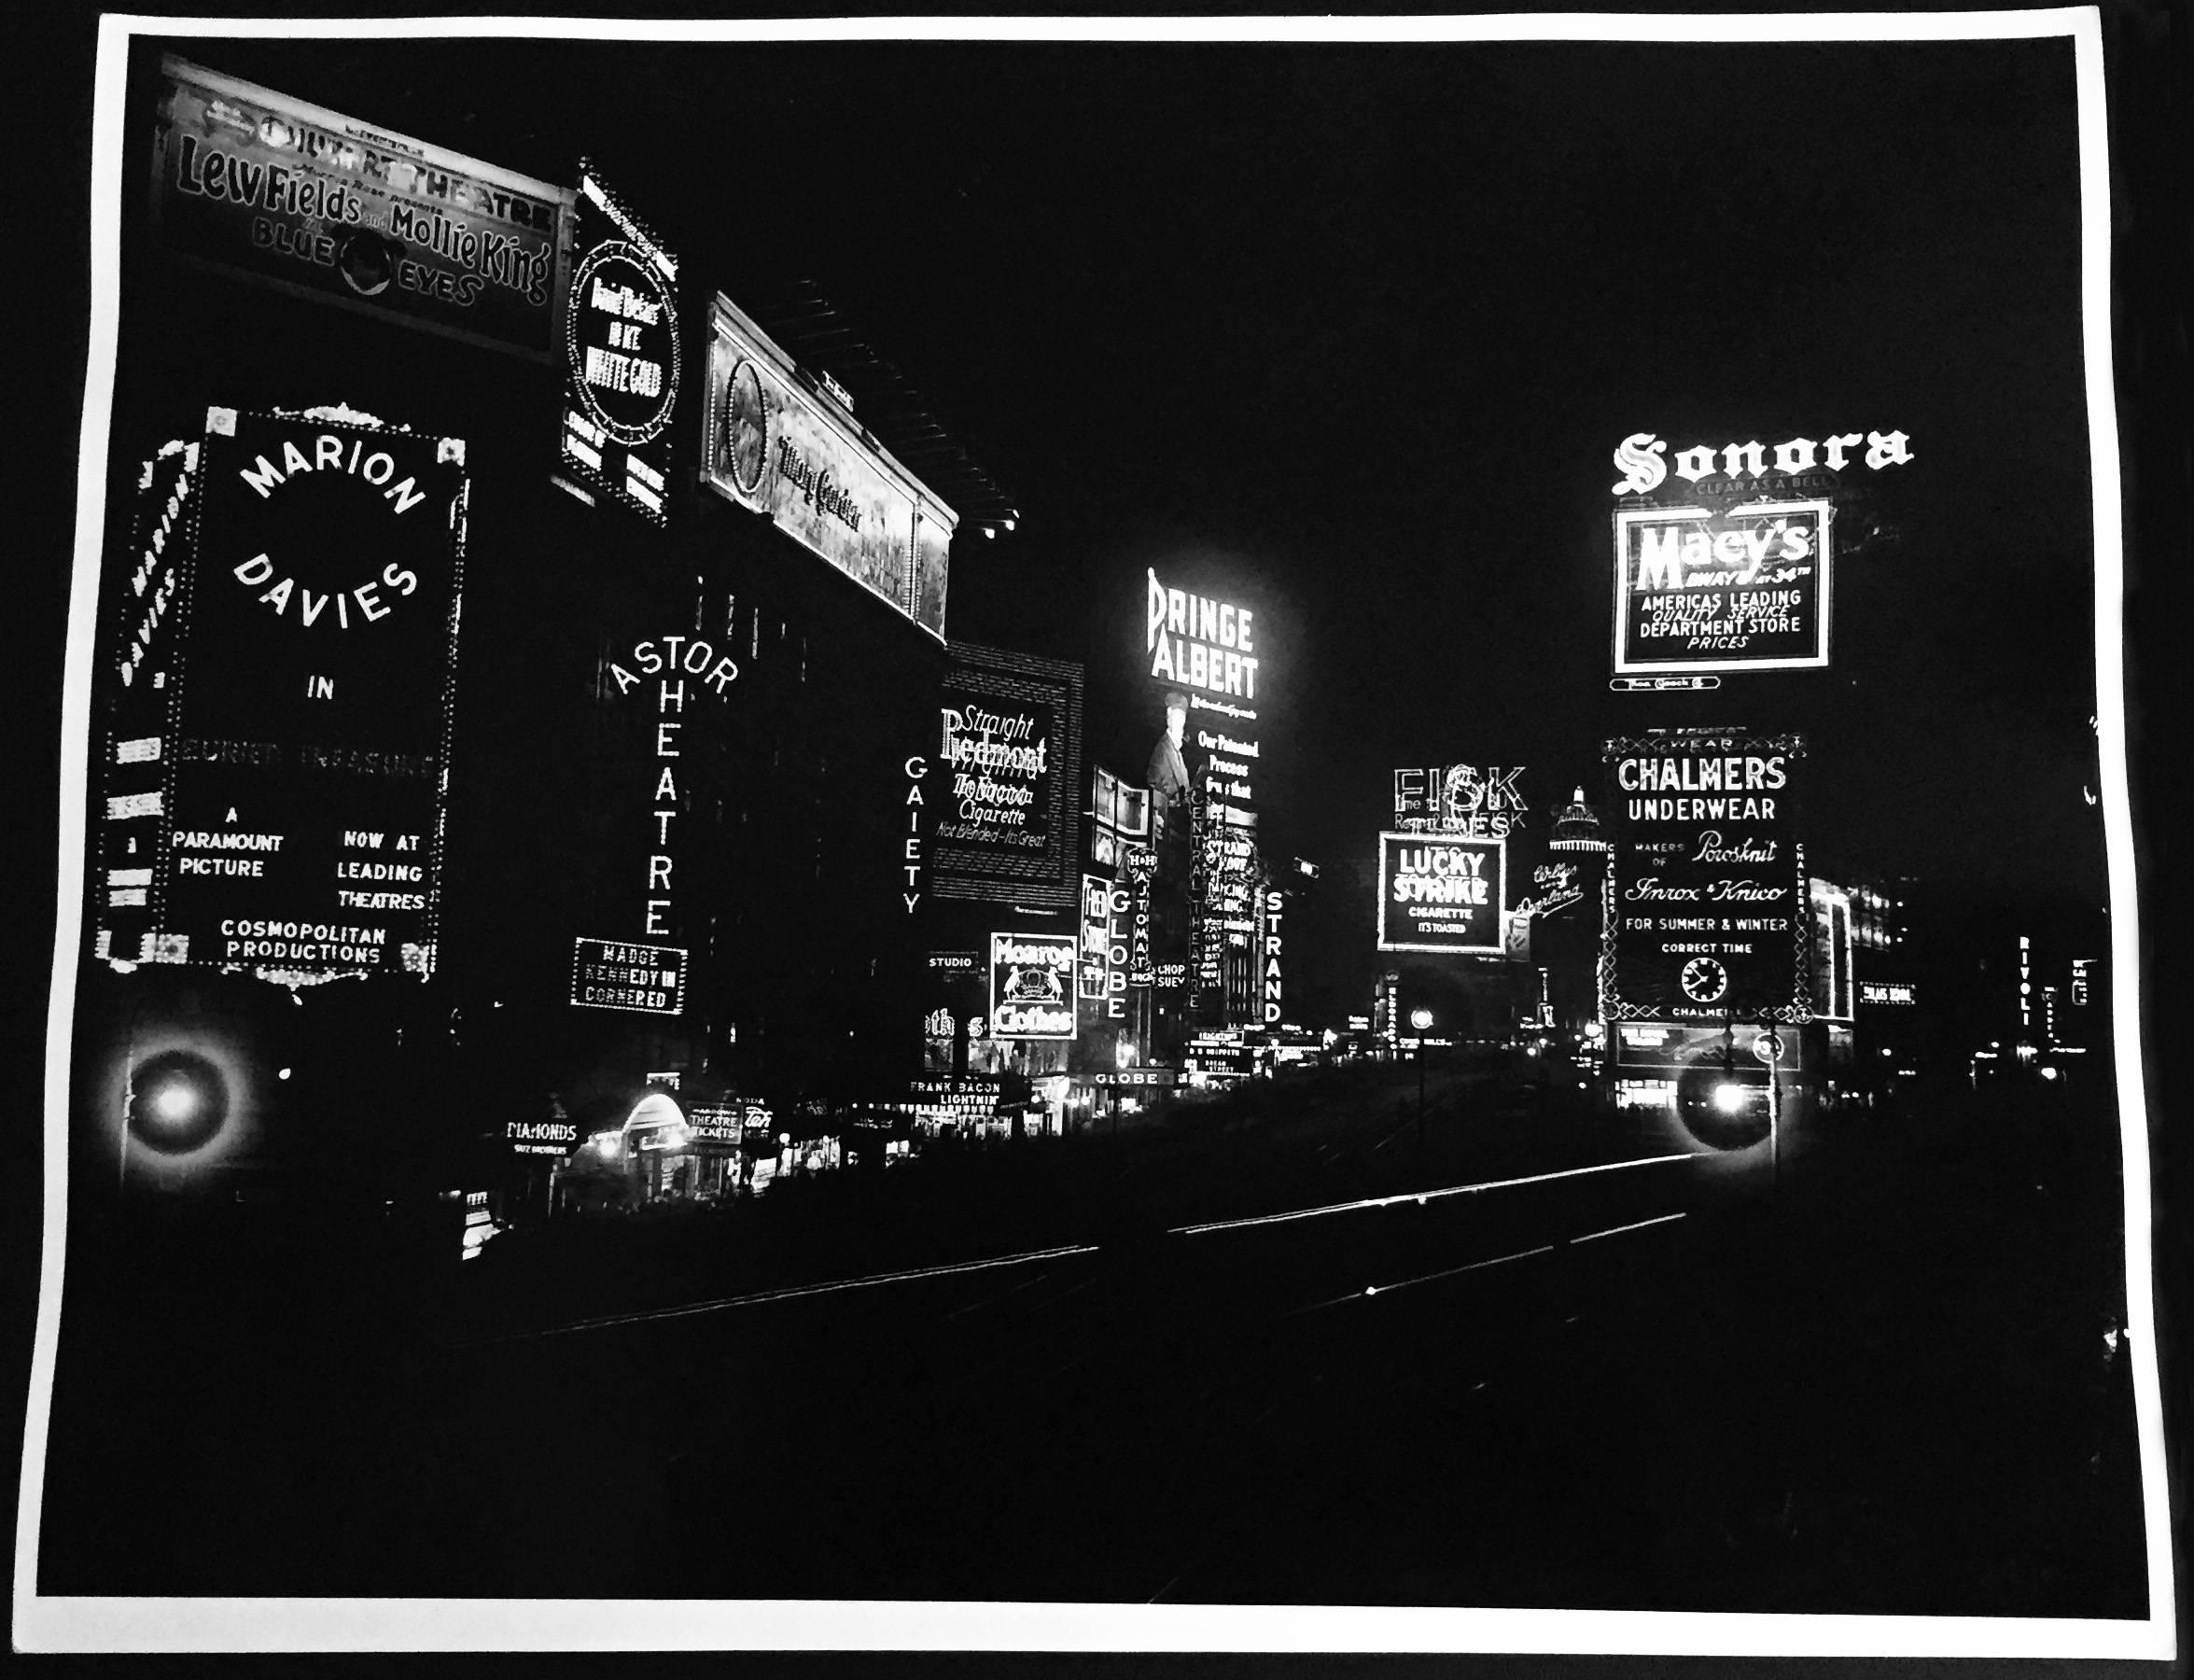 Time Square at night photographed, circa mid-1930s
Vintage original gelatin silver print, printed circa late 1950s

Measures: 16 x 20 inches 
Unsigned from unknown photographer
Very good condition with the exception of some waving on edges